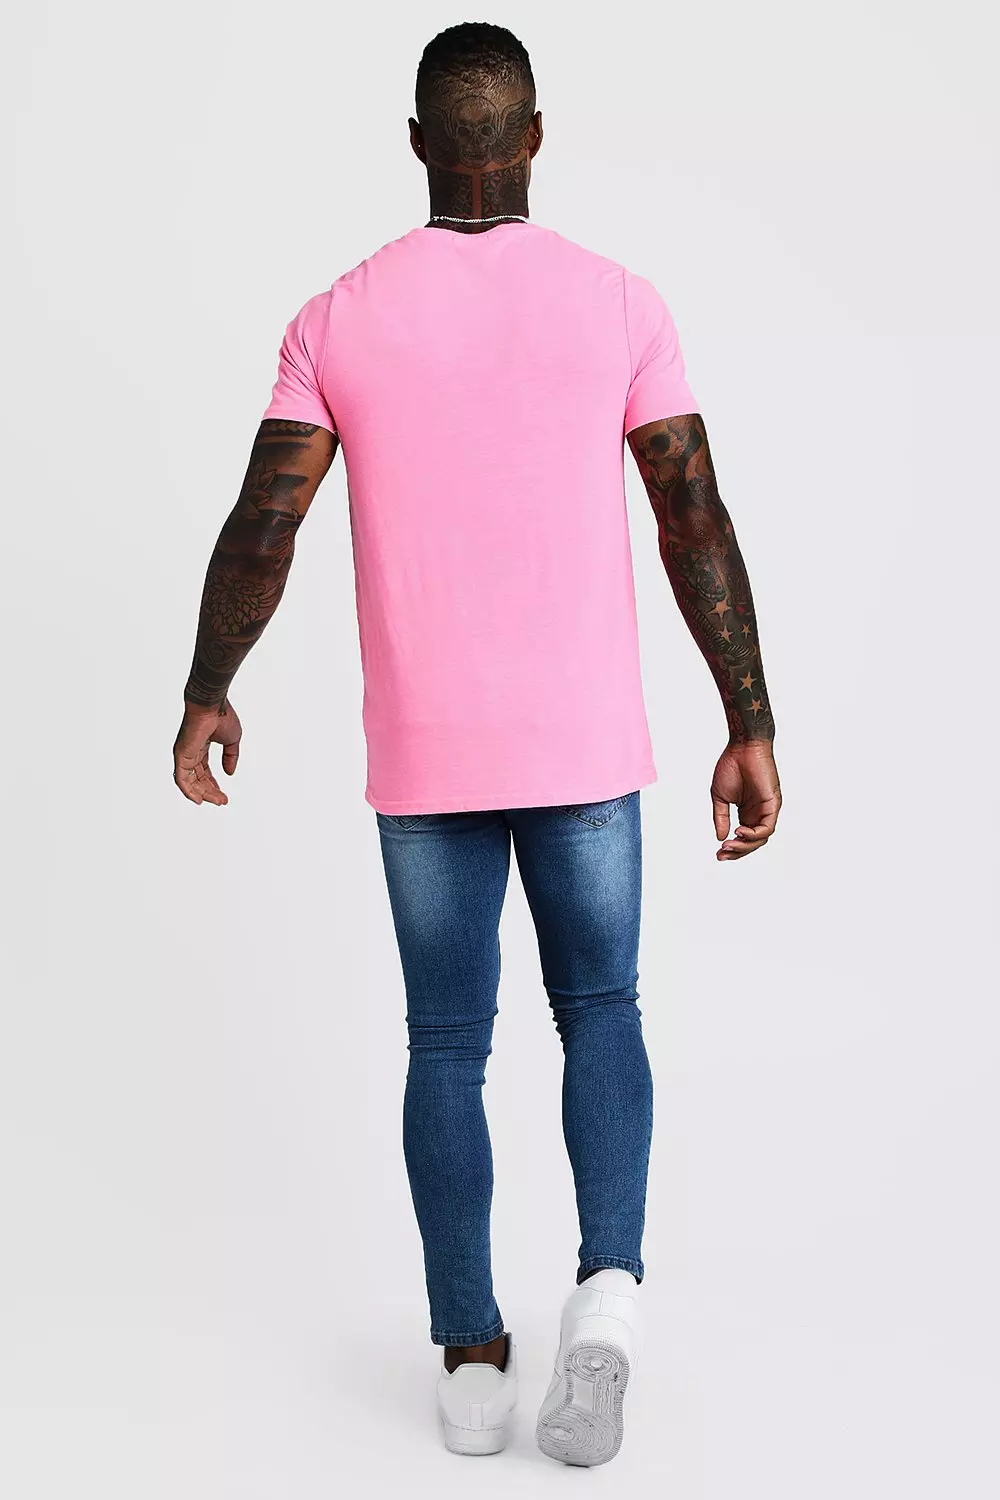 T-Shirt Men Rhinestone Pink Shirt Large Size 4XL New 2023 Summer  Personalized Trend High Quality Short Sleeve Tees Male Top